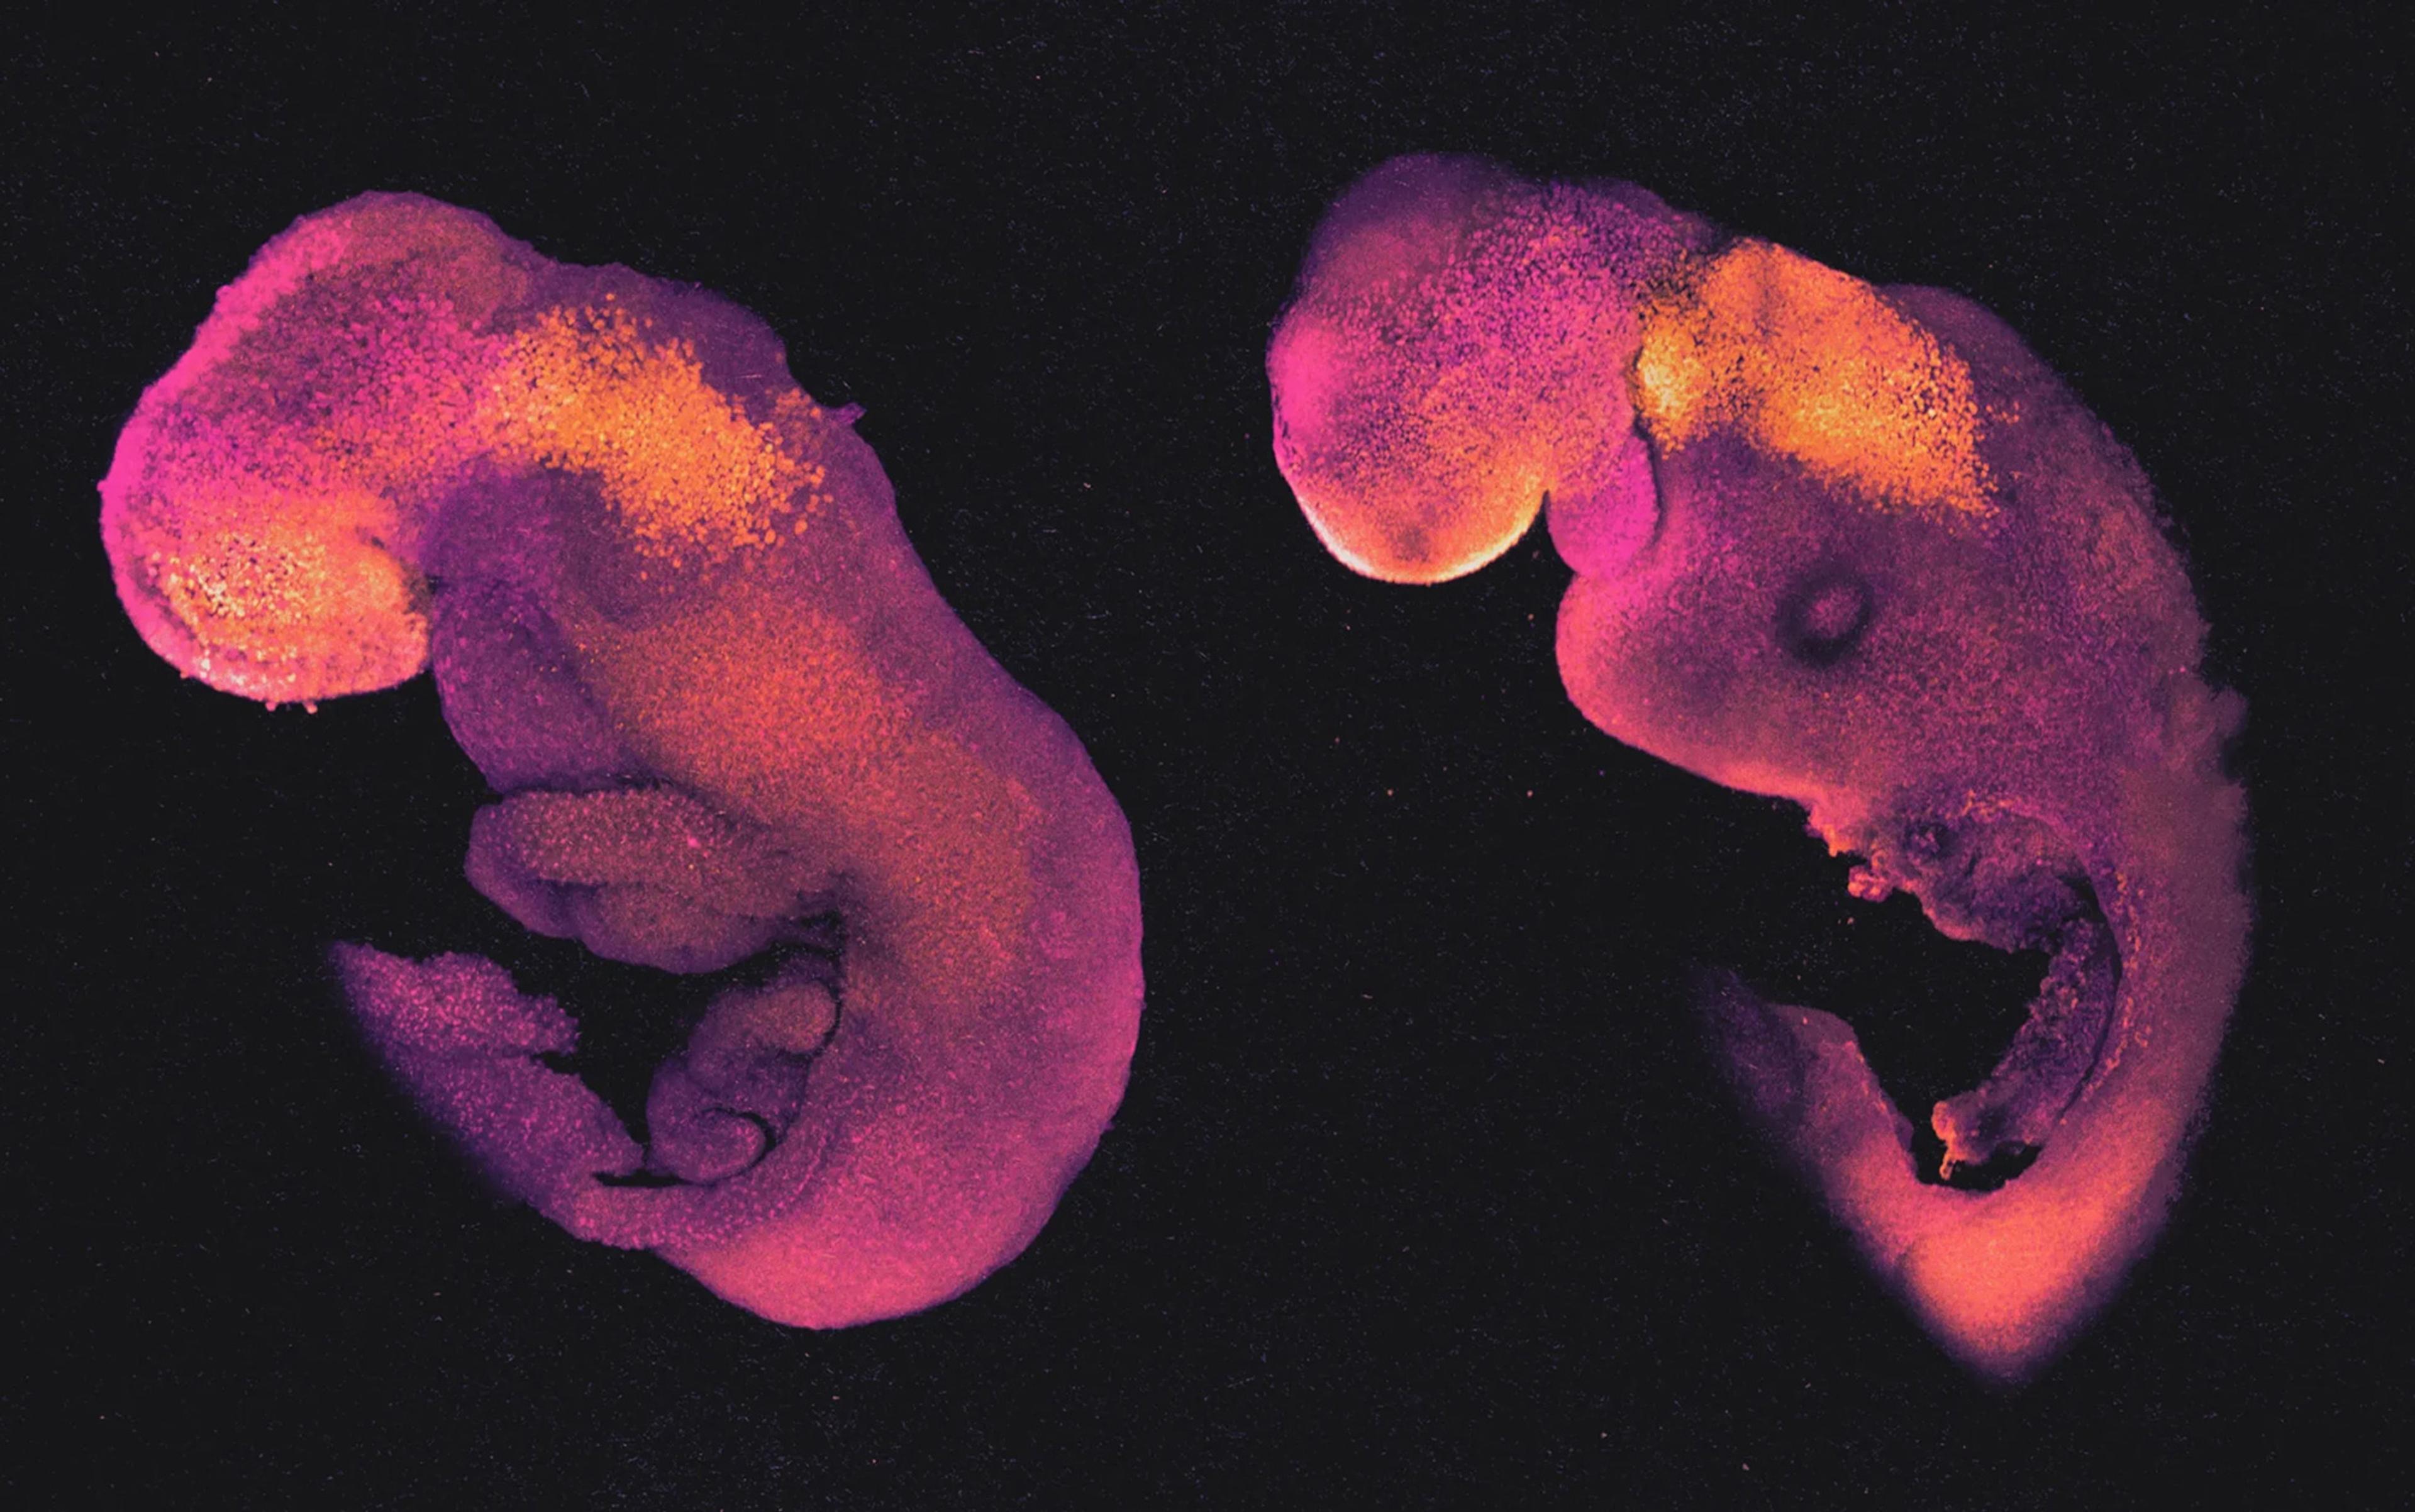 Two embryos, colourised in shades of pink, orange, and purple, against a black background. The embryos have distinguishable head, body, and tail regions.